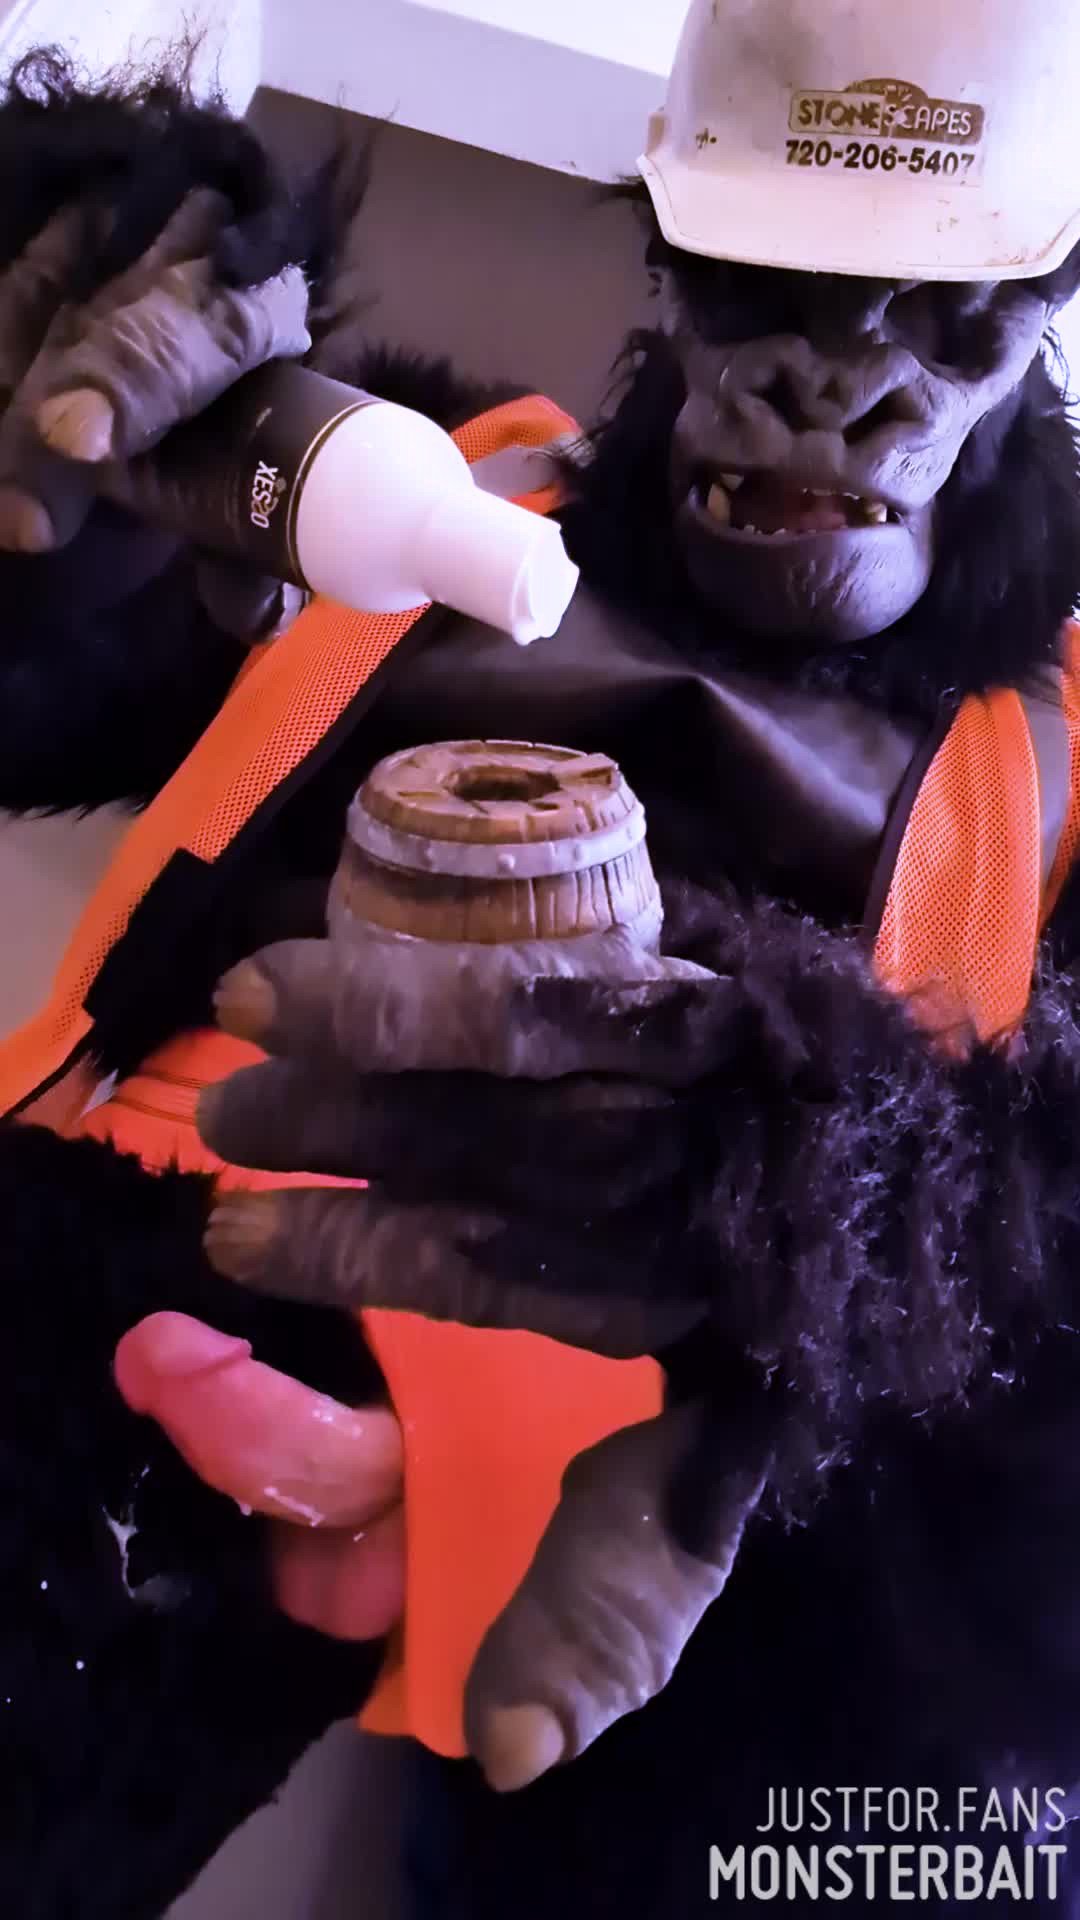 Video by Monsterbait with the username @Monsterbait, who is a star user,  March 28, 2024 at 3:42 PM. The post is about the topic GayExTumblr and the text says 'Gorilla shoots a monster load in hot barrel toy.🦍💦
10% off toys with code "monsterbait"
https://gorilla-machine.com/?afi=monsterbait

All full length videos & early releases of lots of mask content for subscribers on:..'